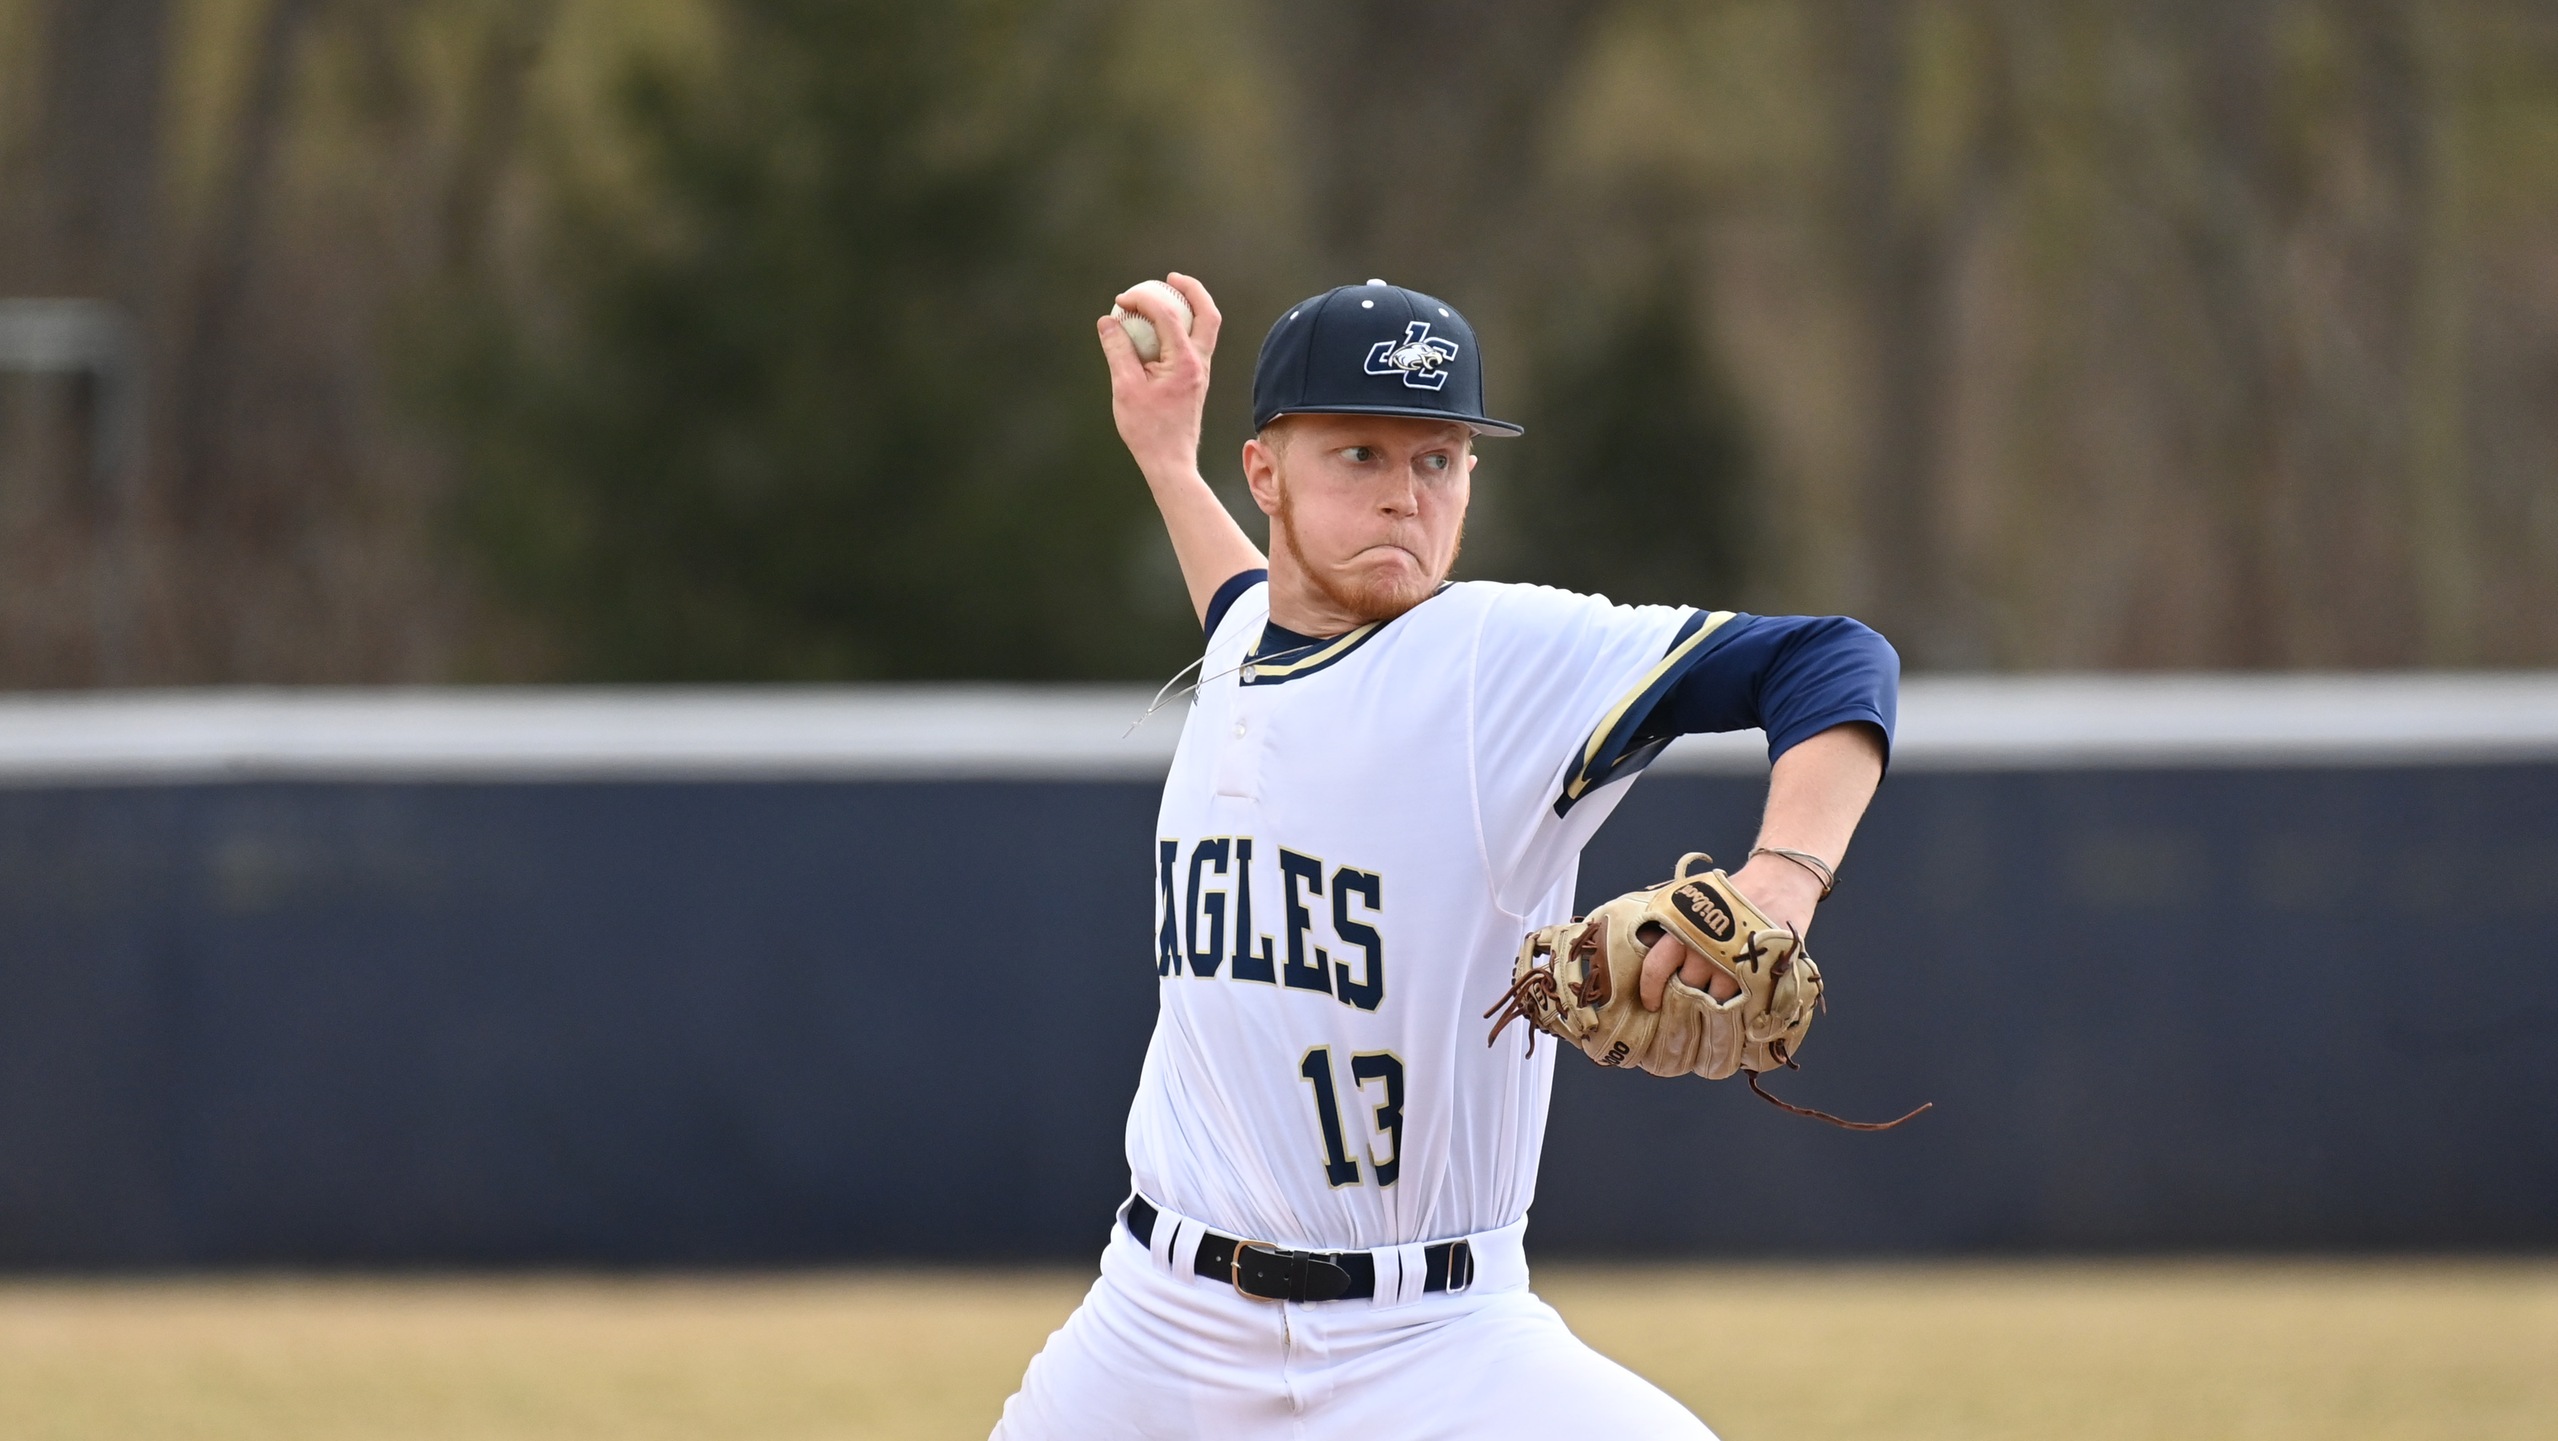 Eagles Score 17 Across Two Wins at Drew, Johnson Tosses Complete Game Two-Hitter in Game Two